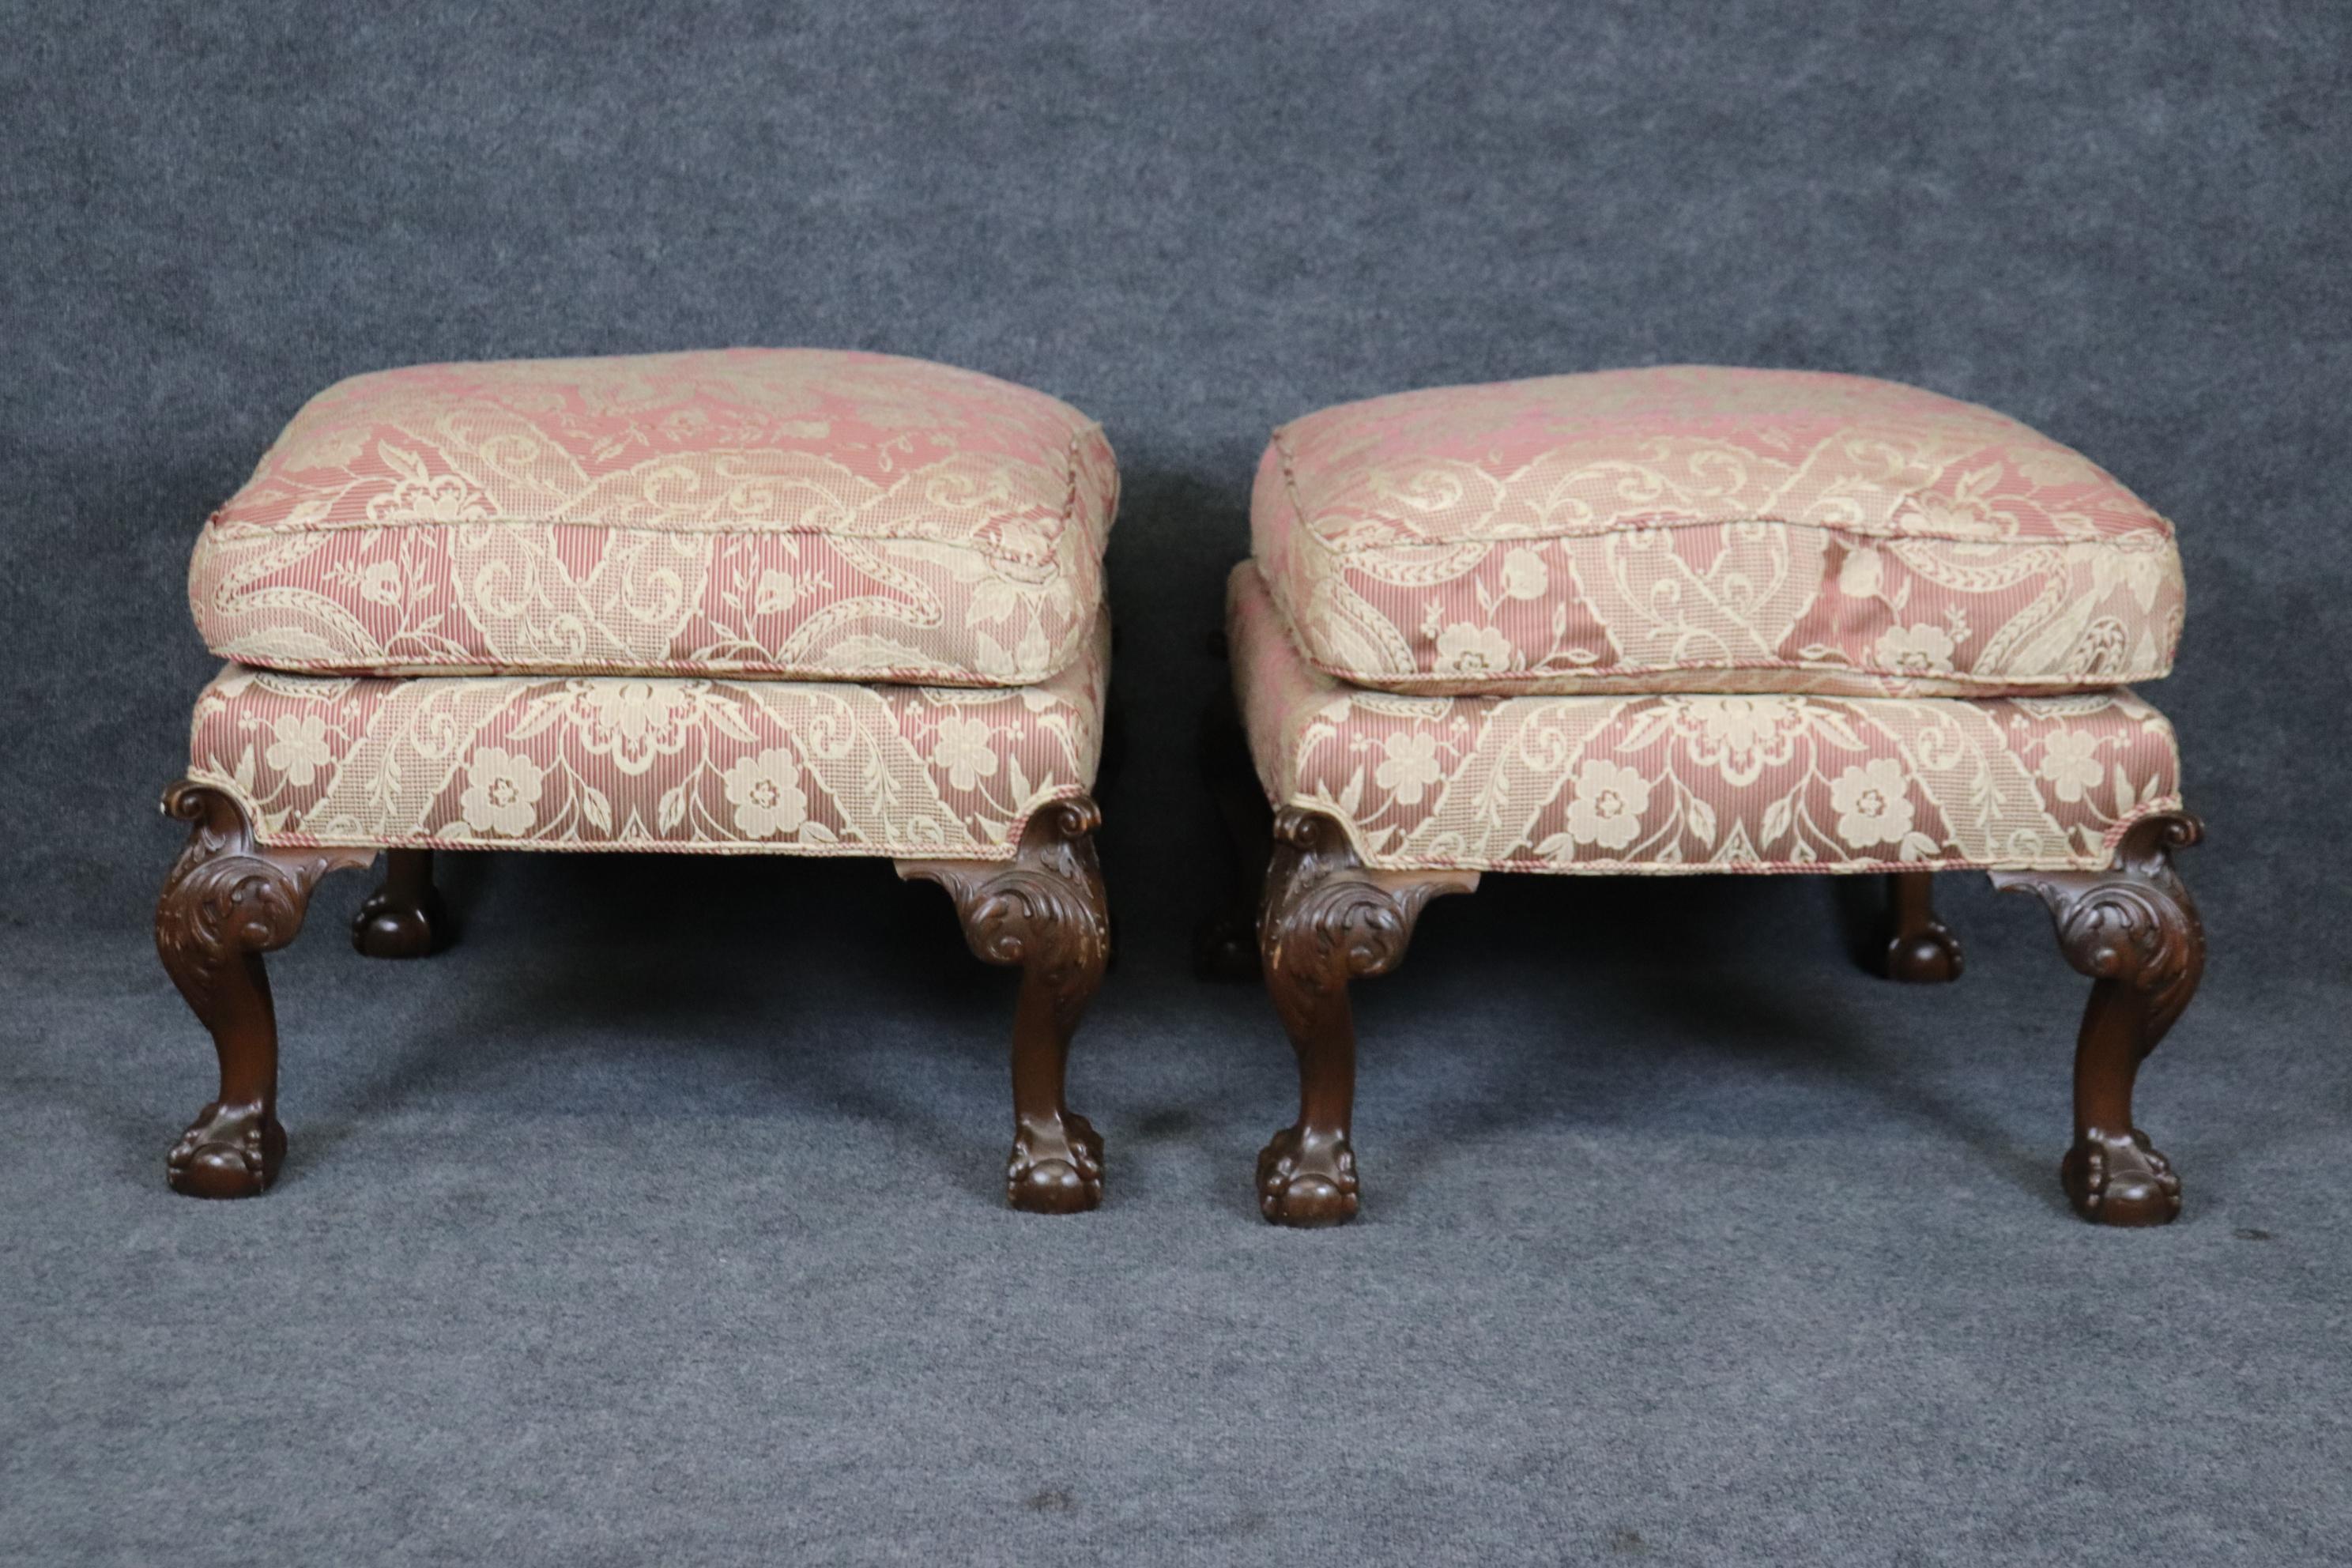 English Superb Pair Centennial Carved Chippendale Mahogany Square Foot Stools For Sale